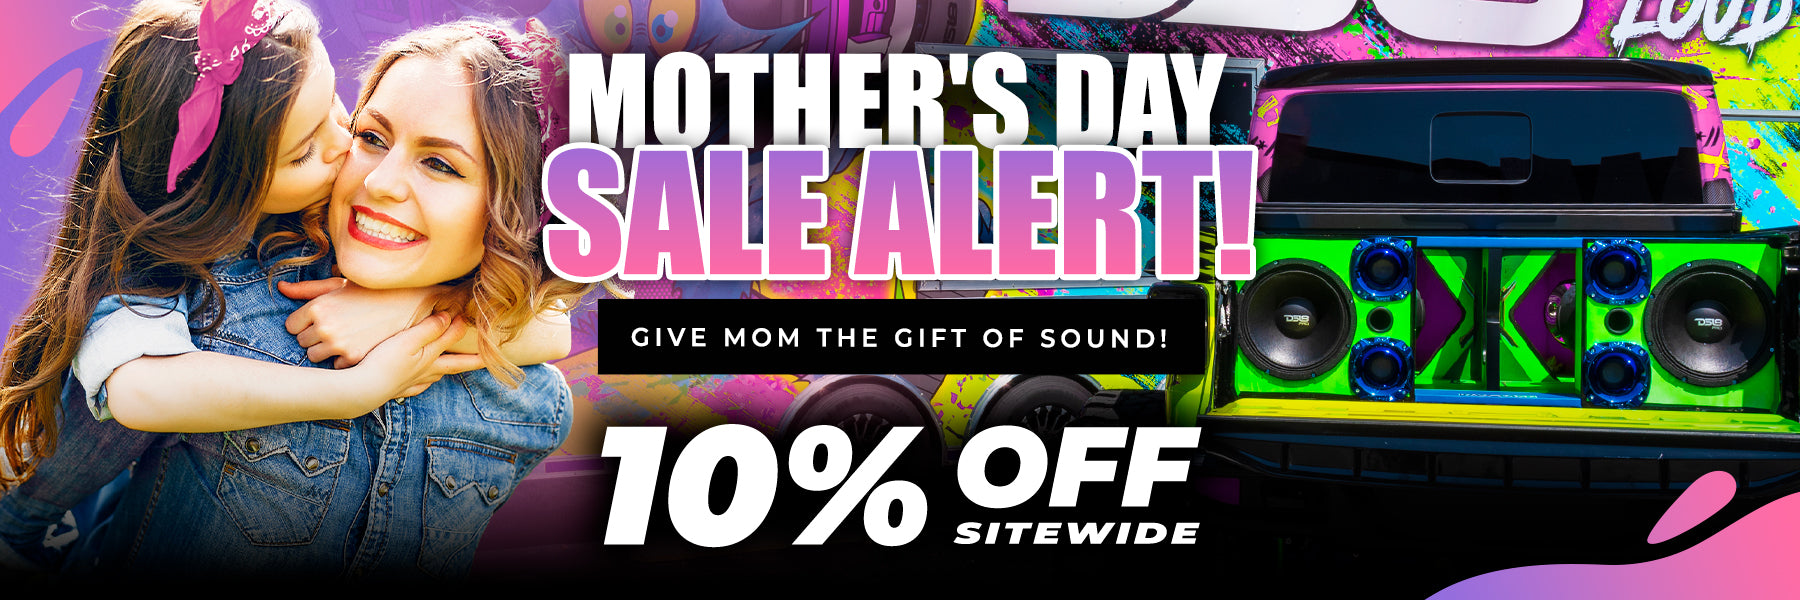 DS18's Unmissable Mother's Day Deals!